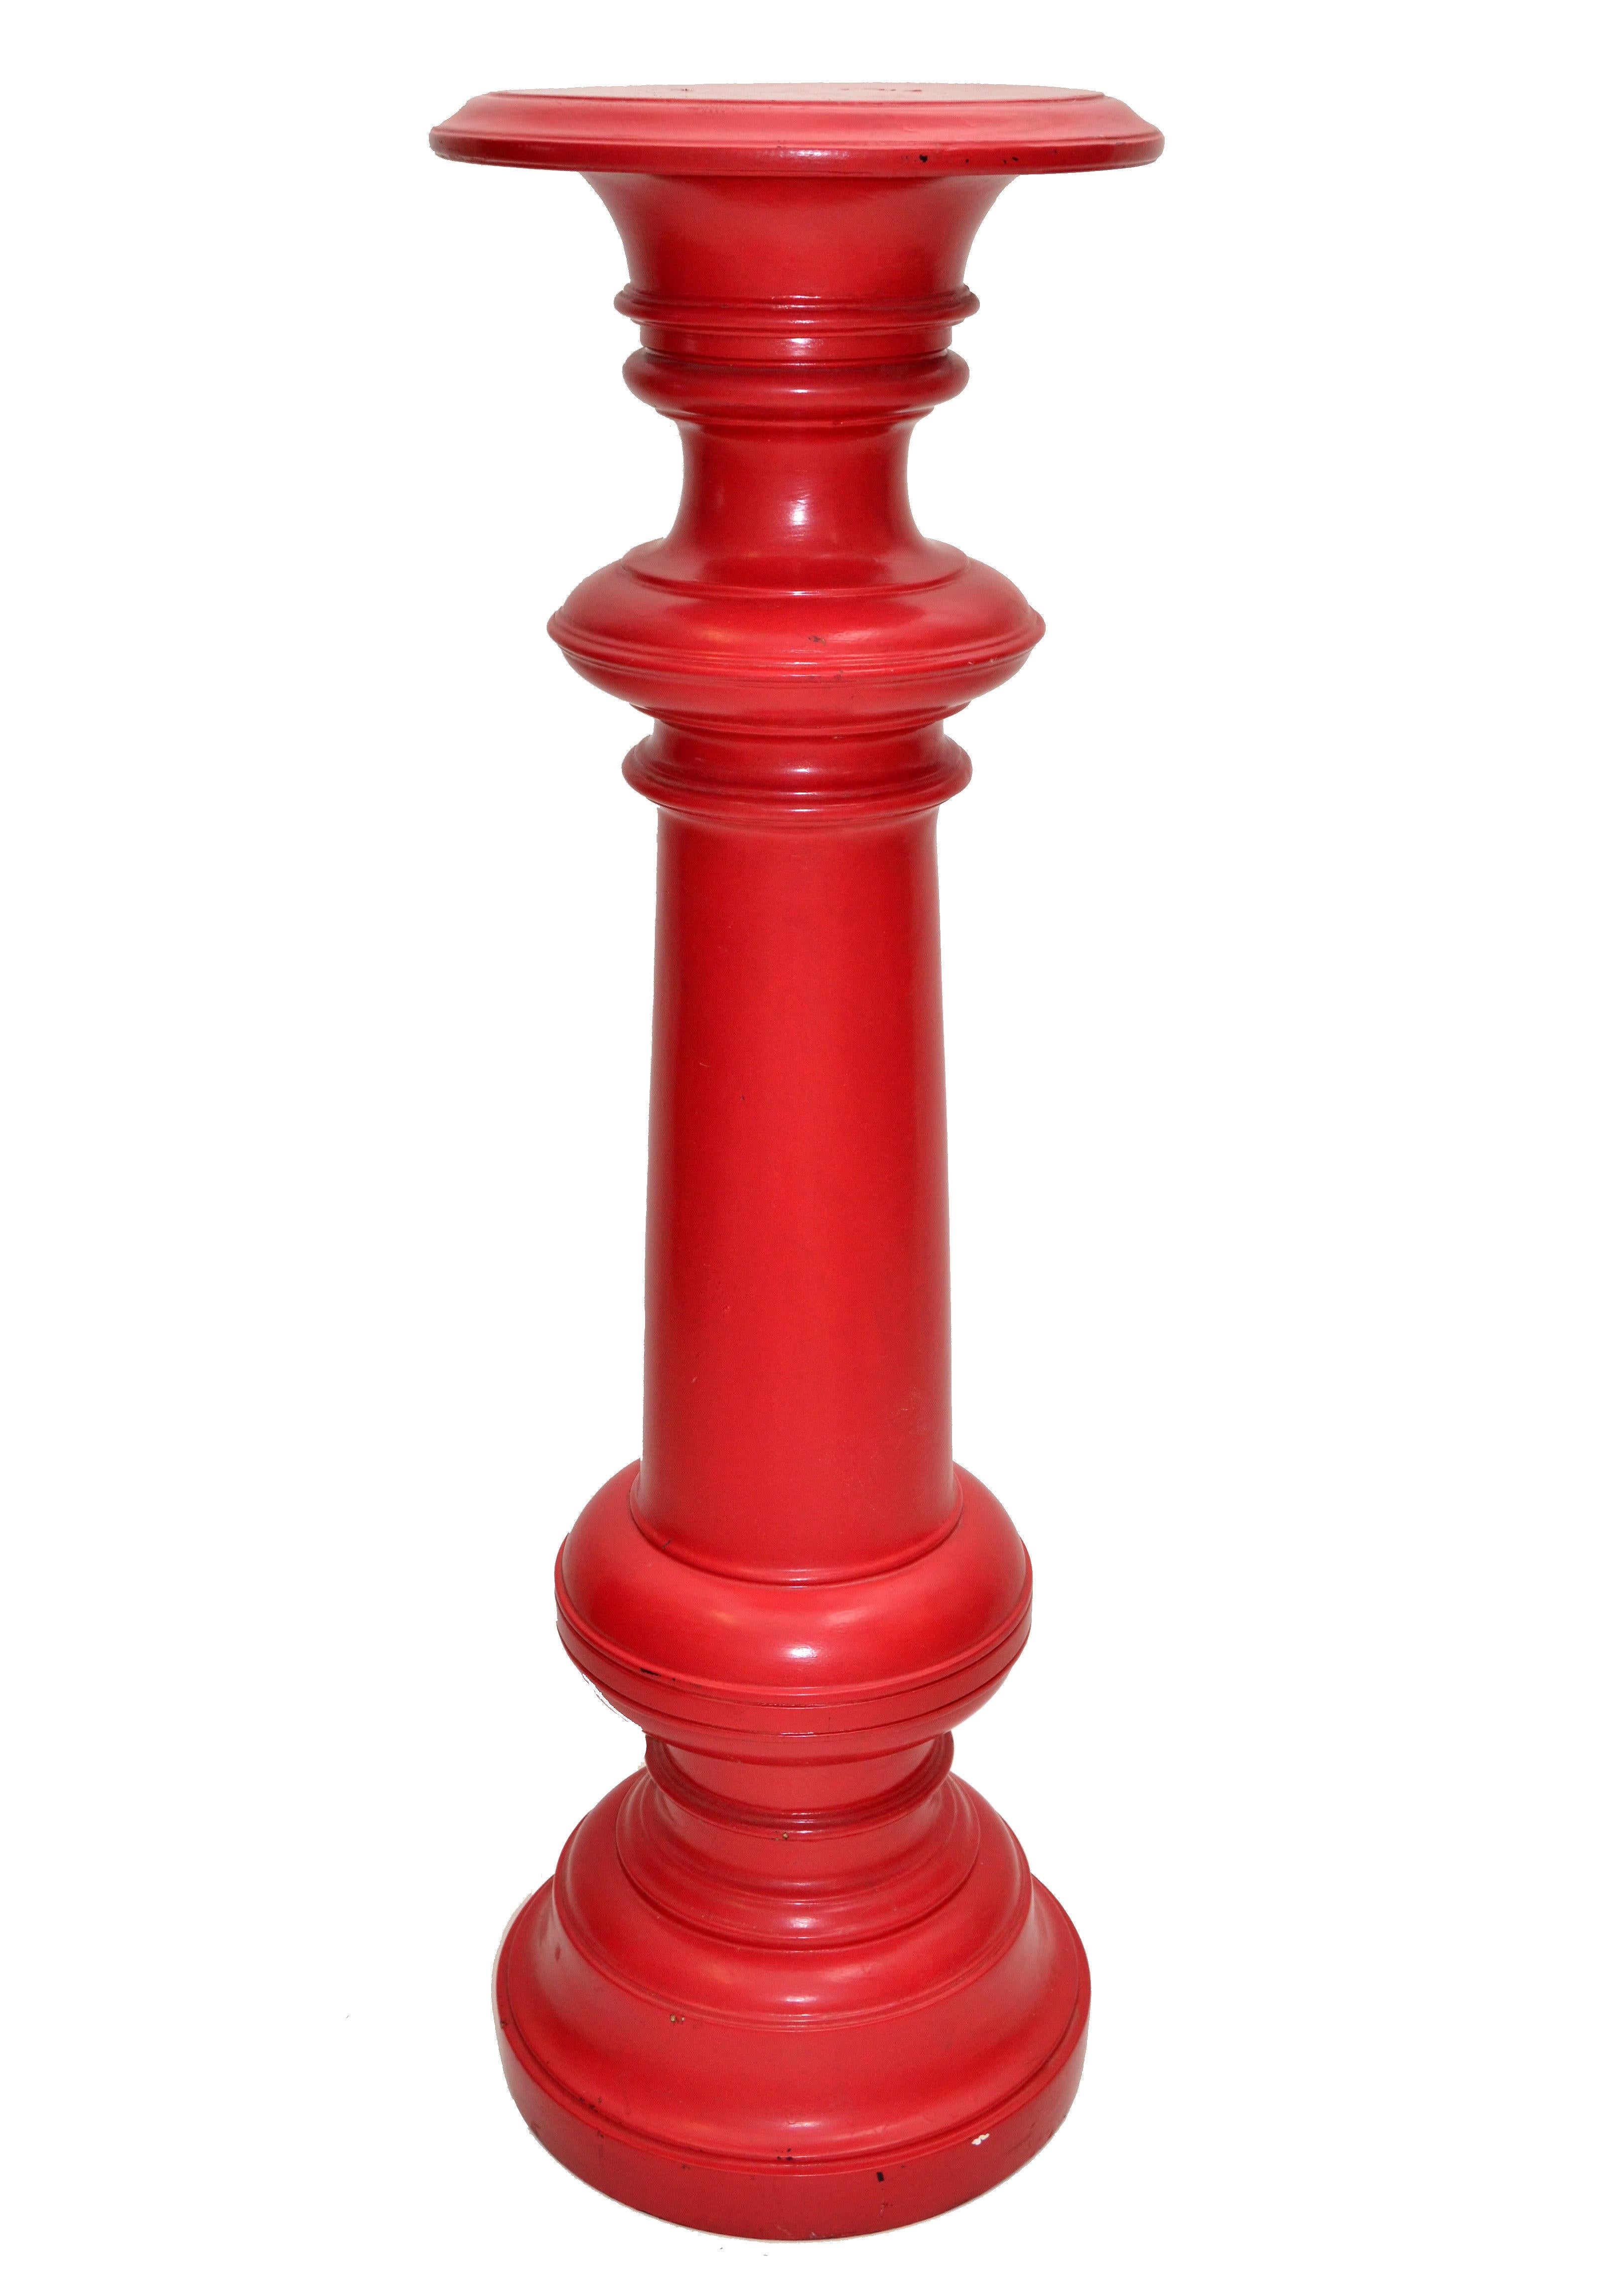 Paint Tall Mid-Century Modern Turned Wood Red Finish Plant Stand Sculpture Pedestal For Sale